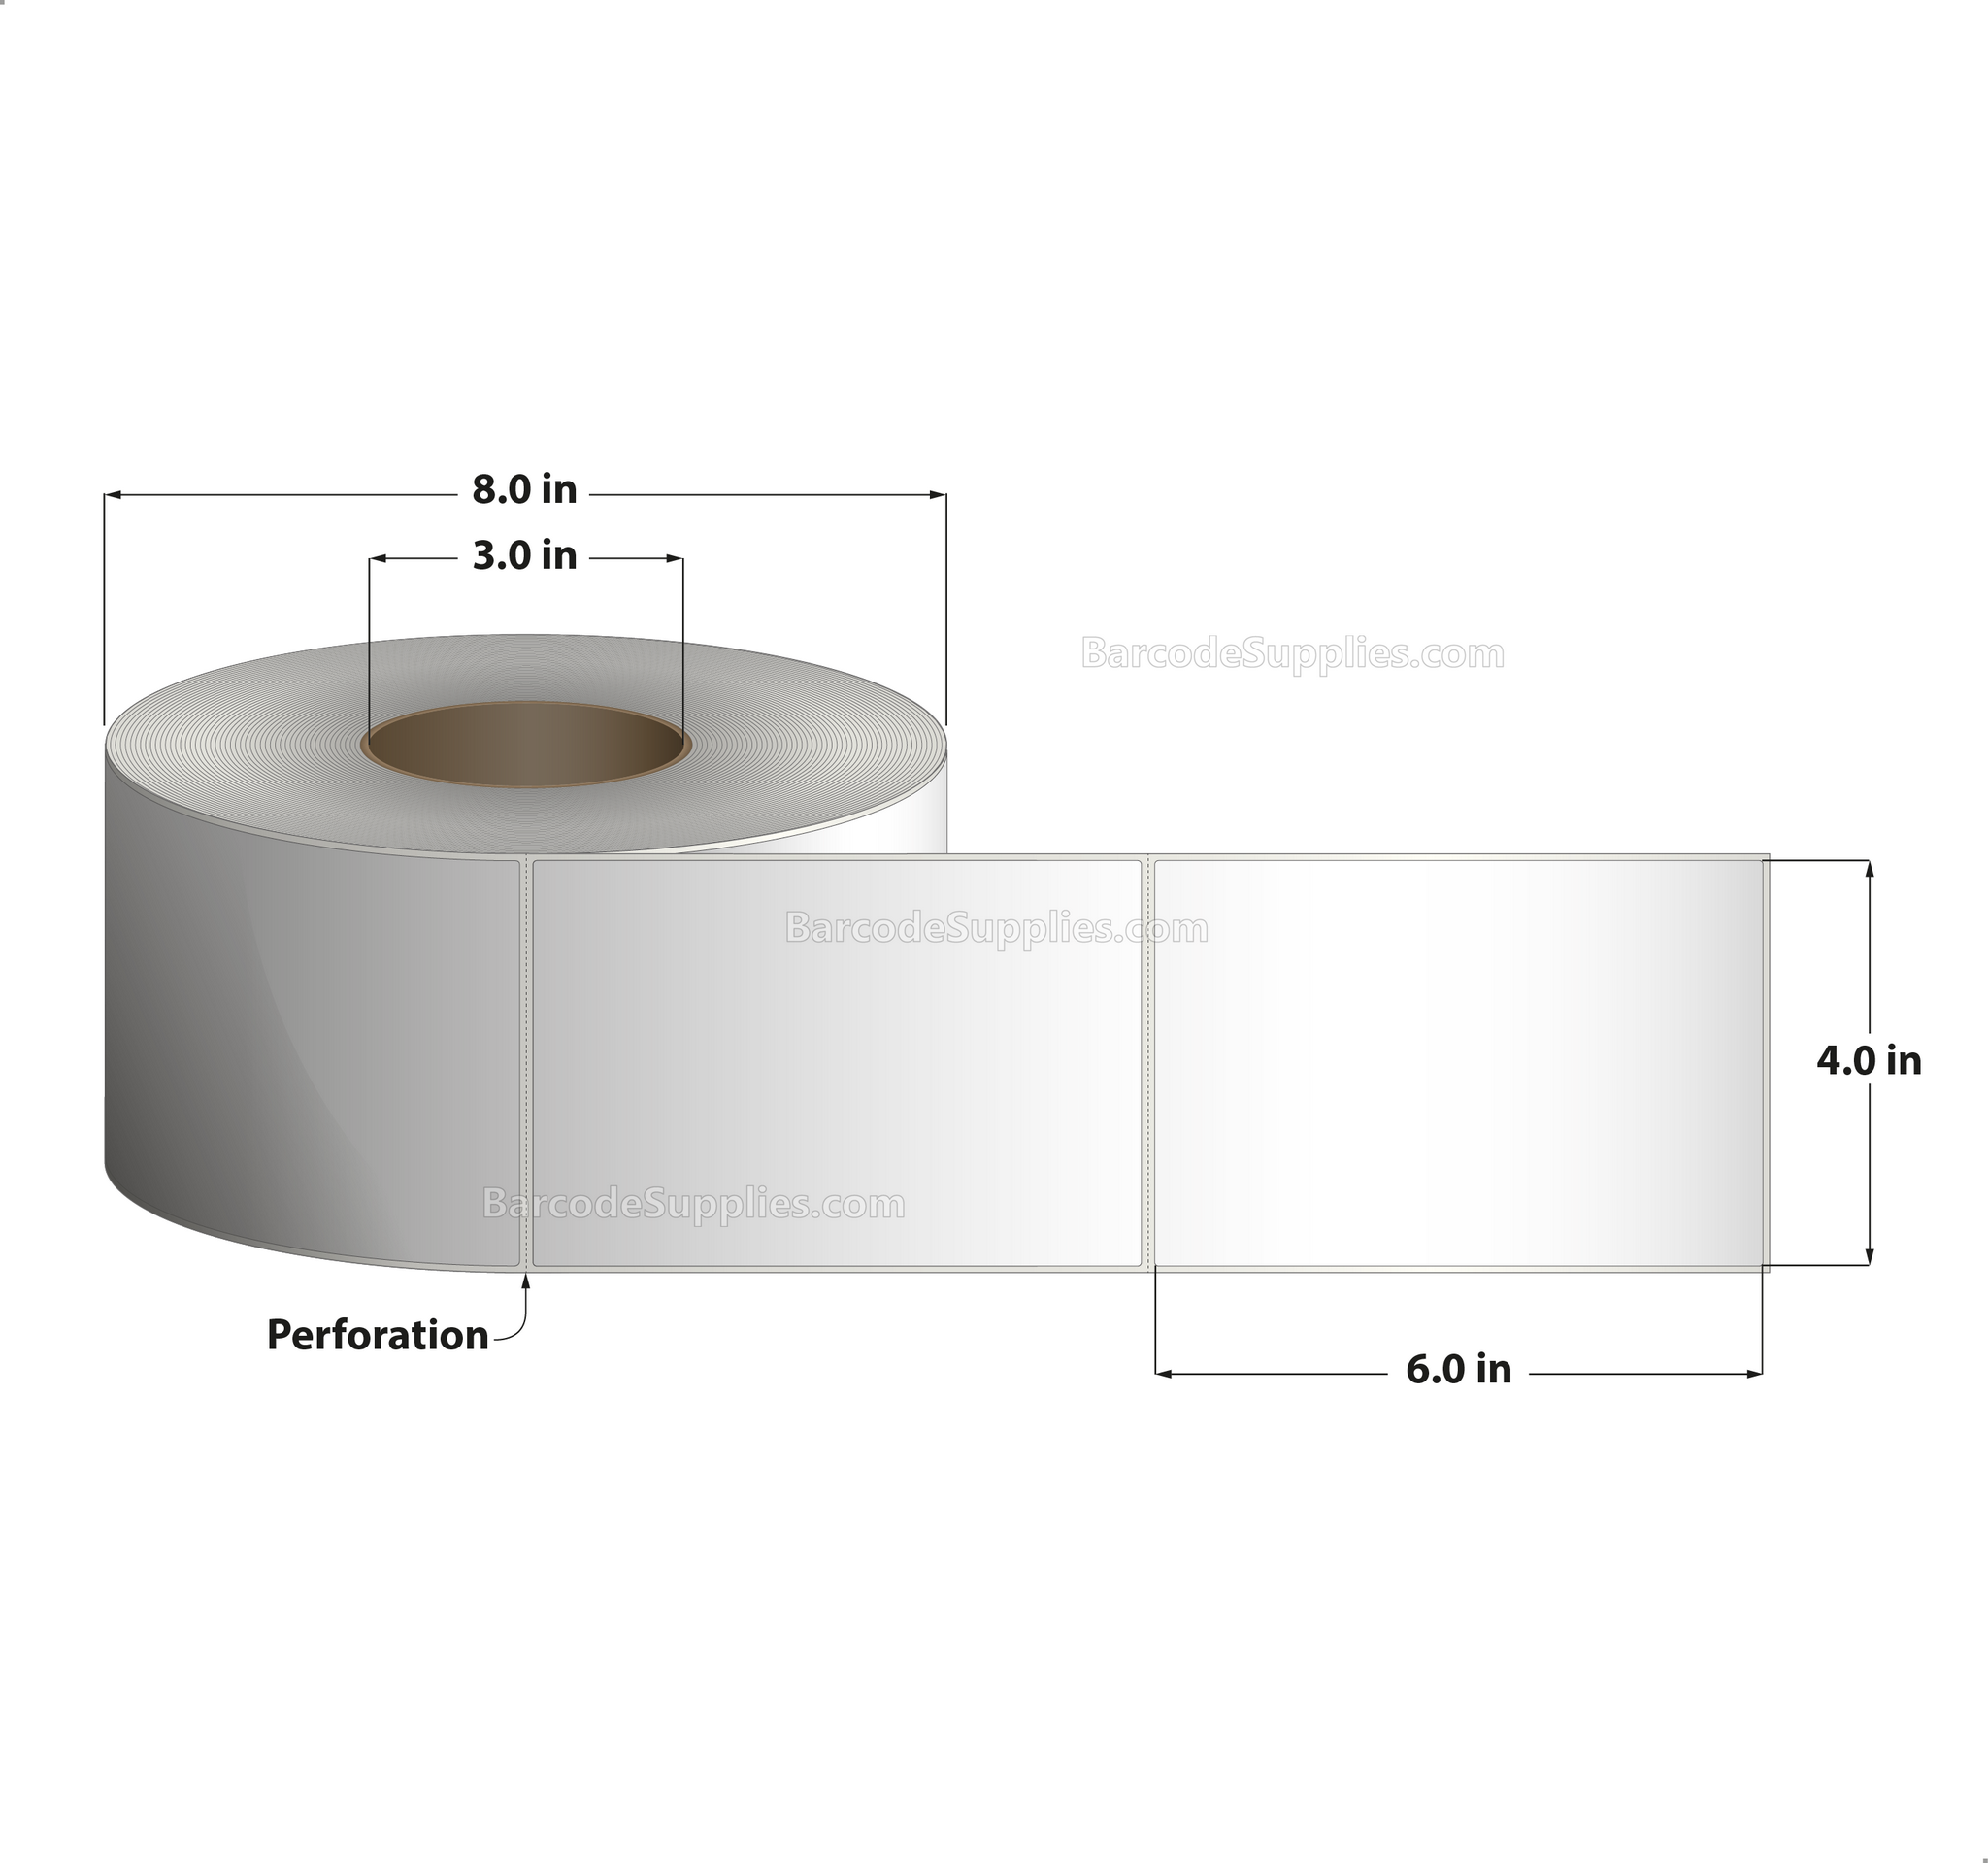 4 x 6 Thermal Transfer White Labels With Rubber Adhesive - Perforated - 1000 Labels Per Roll - Carton Of 4 Rolls - 4000 Labels Total - MPN: CTT400600-3P